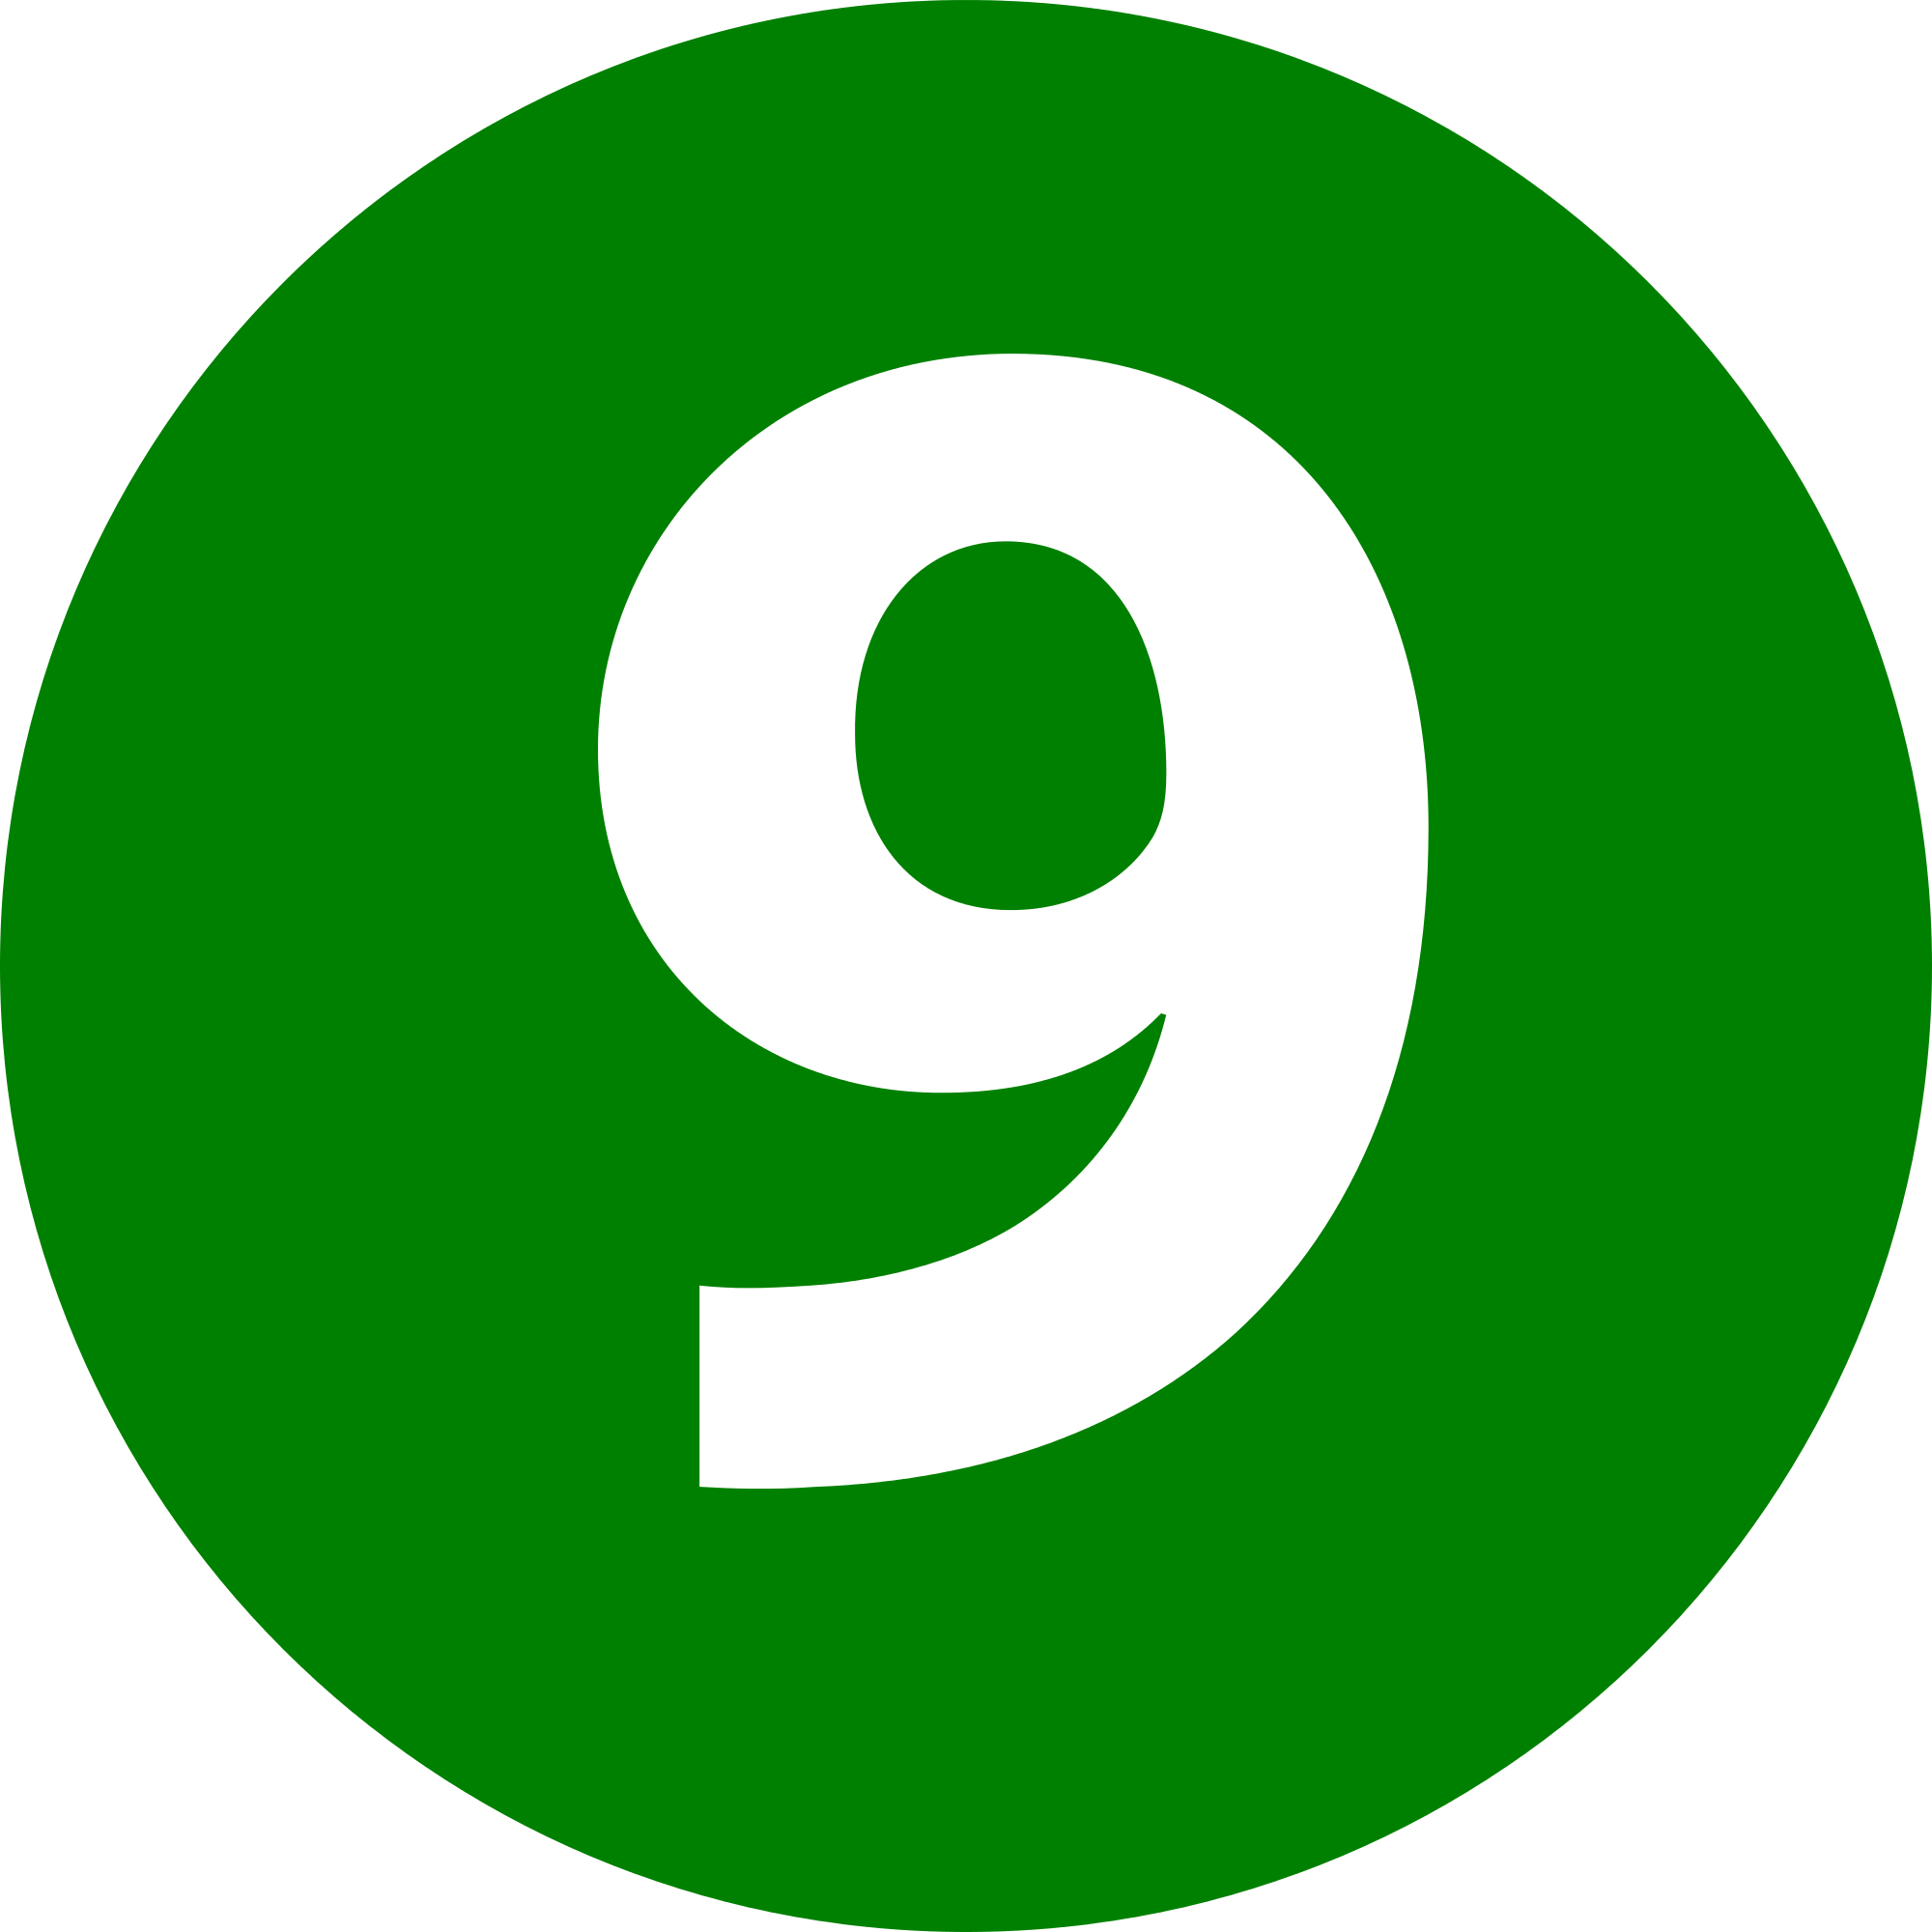 A Green Circle With A White Number On It